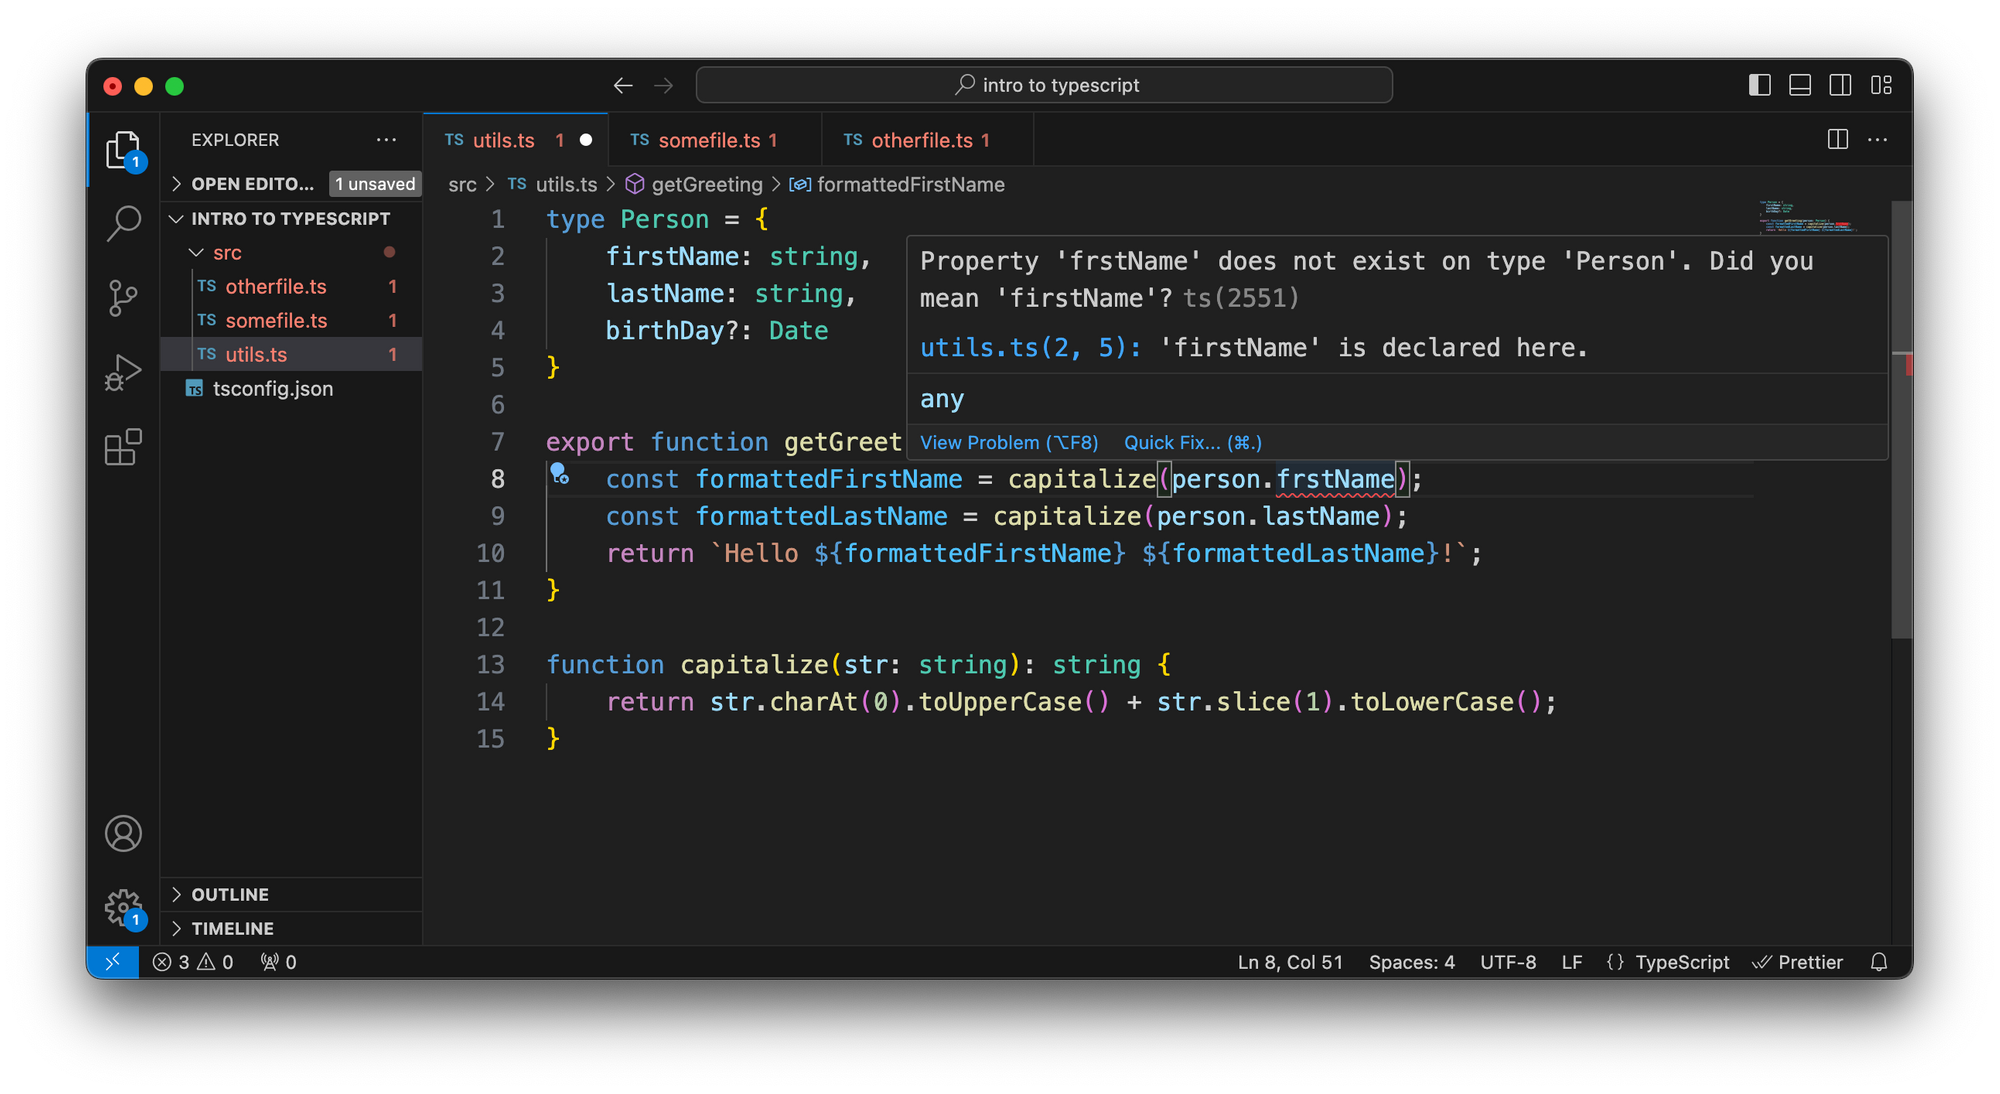 VS Code with the same TypeScript file. Except now we updated the function to use the new function argument. By mistake, we made a typo. The editor highlights the typo and it makes a suggestion.